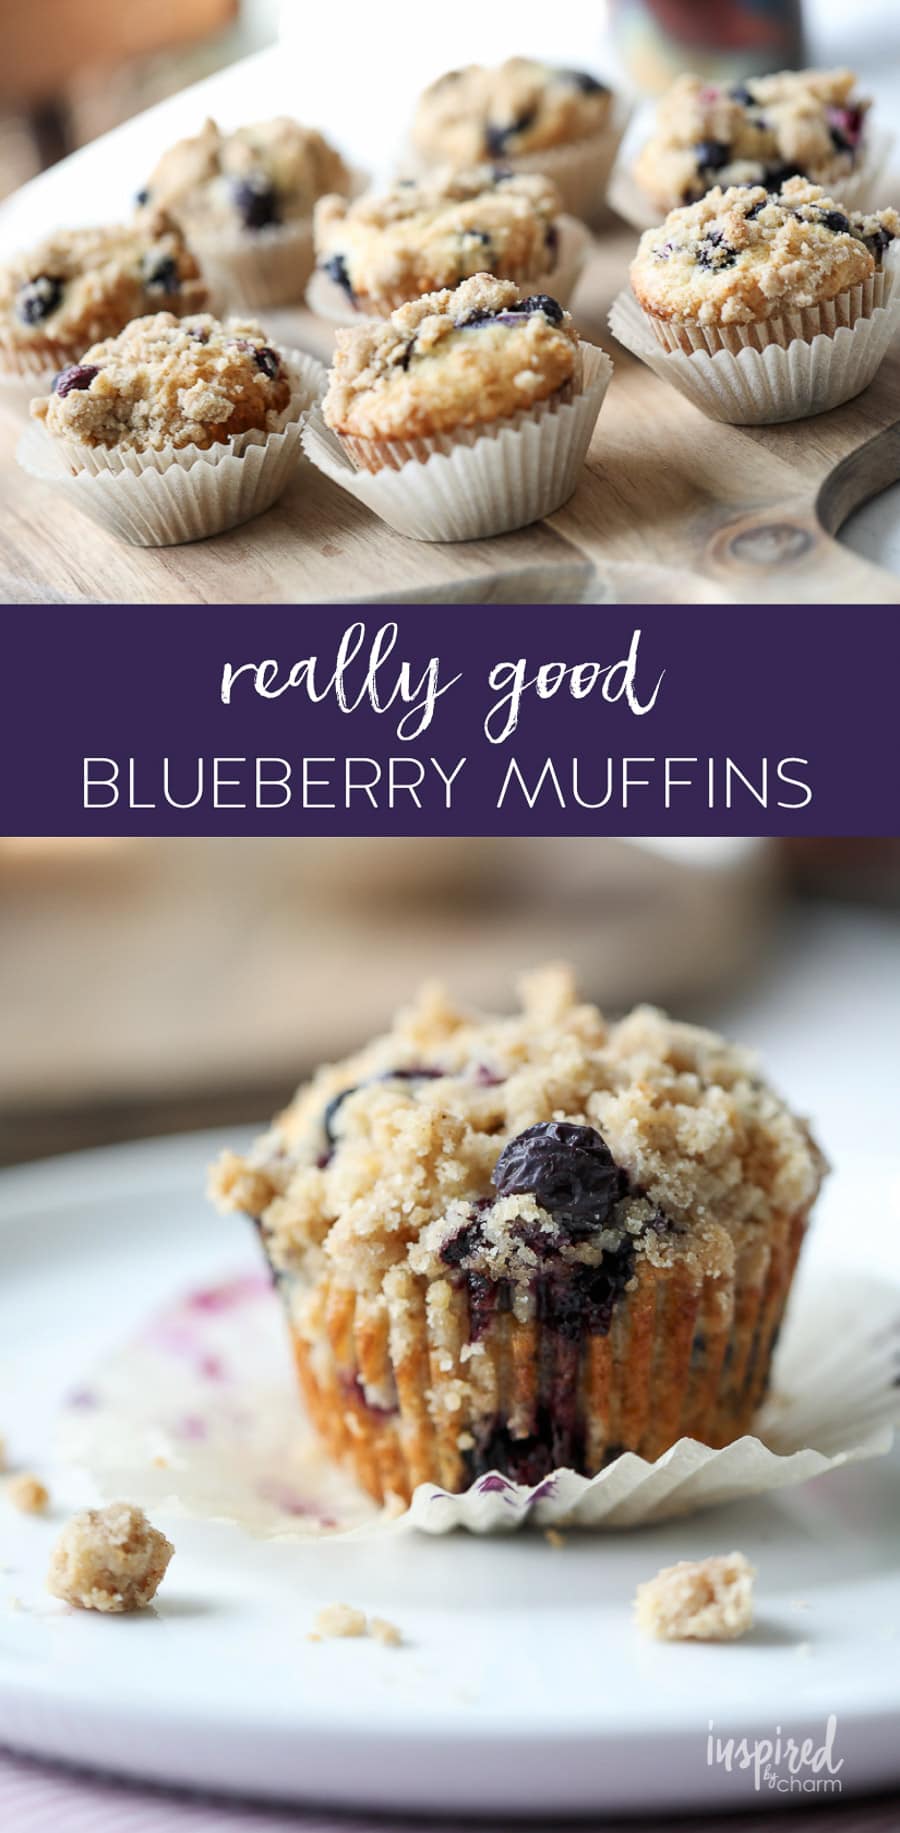 Really Good Blueberry Muffins recipe for breakfast, brunch, or anything in-between! #blueberry #muffin #breakfast #blueberrymuffin #recipe